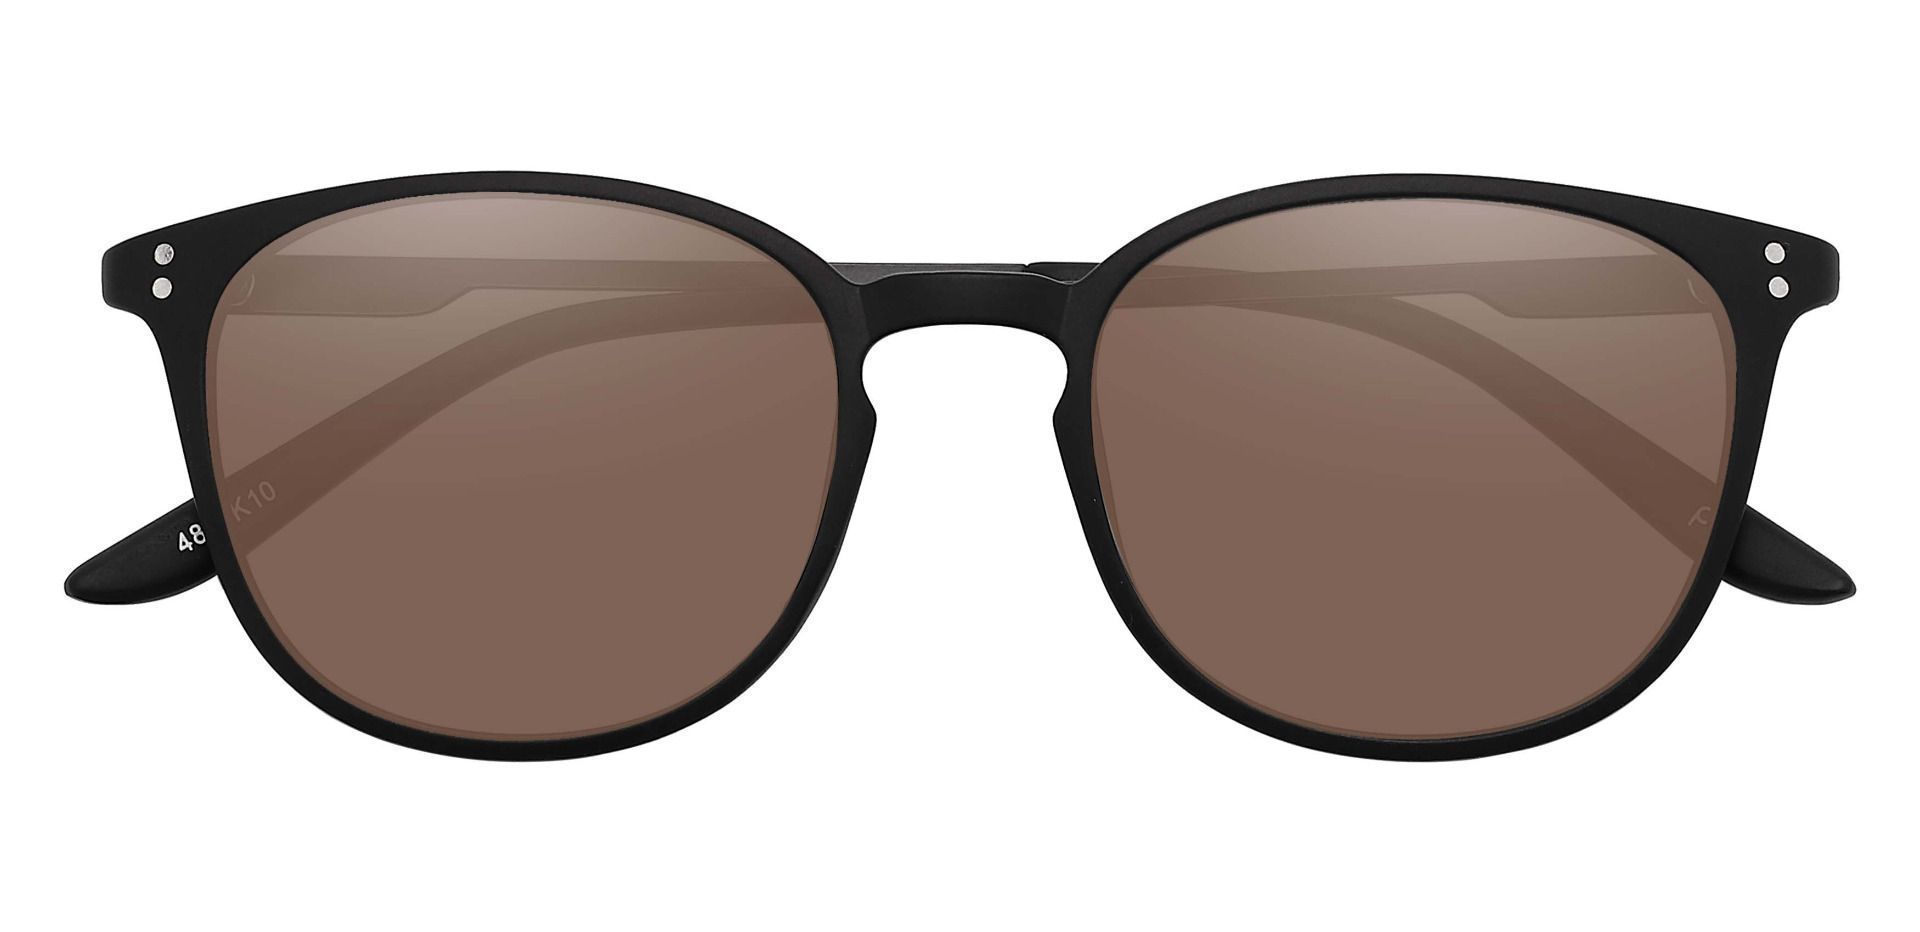 Wales Oval Lined Bifocal Sunglasses - Black Frame With Brown Lenses